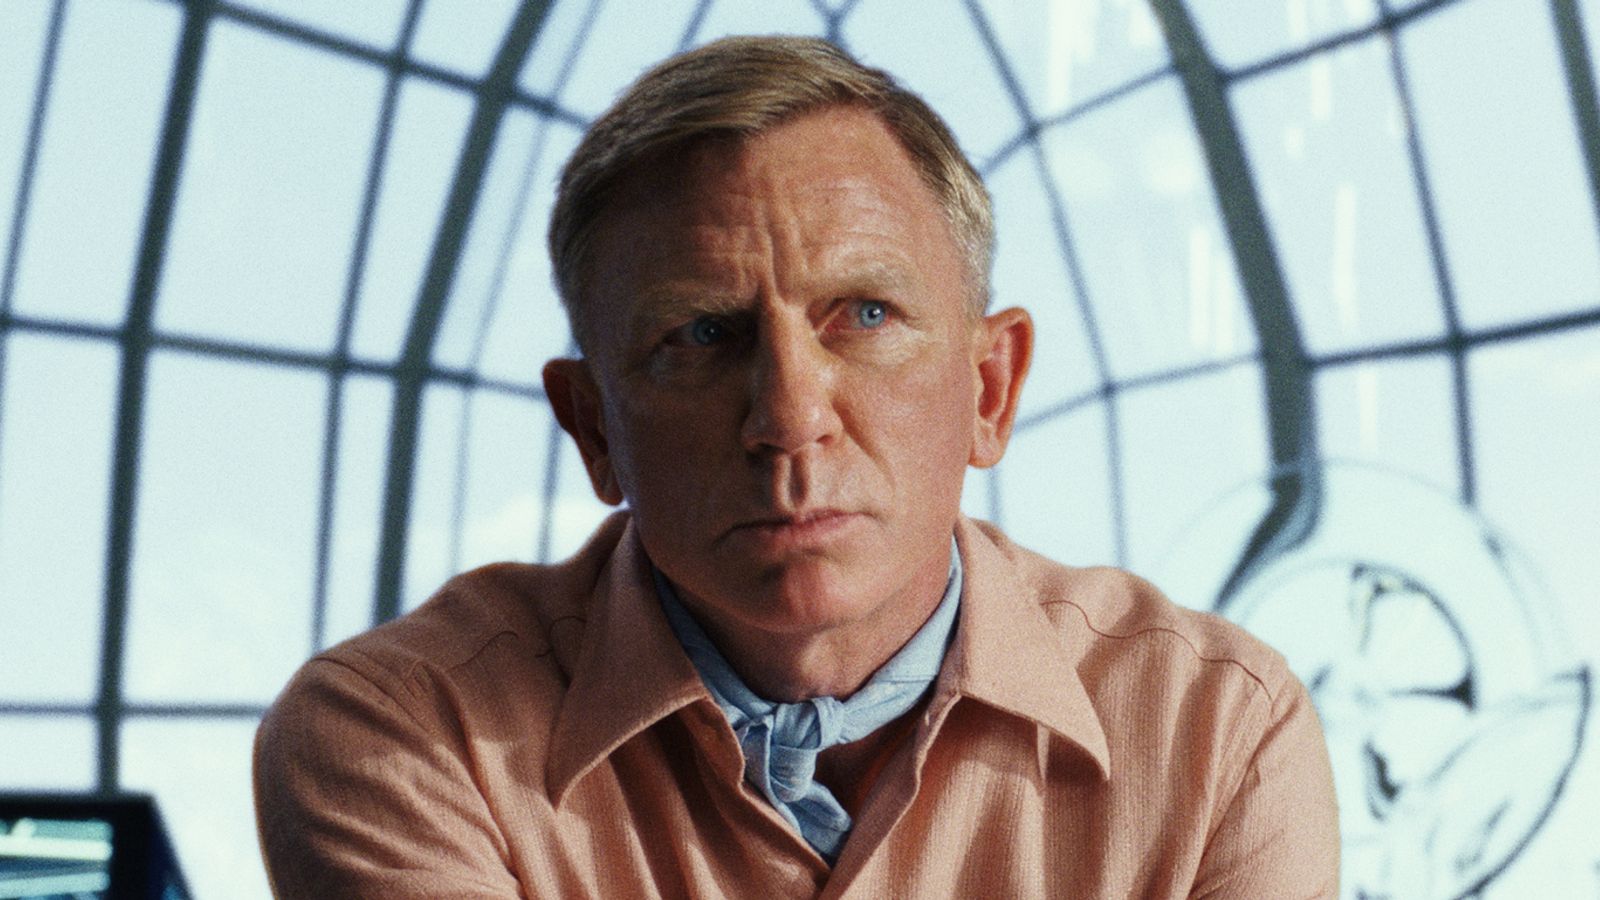 Daniel Craig is back in Knives Out sequel Glass Onion - and this time he's investigating influencers